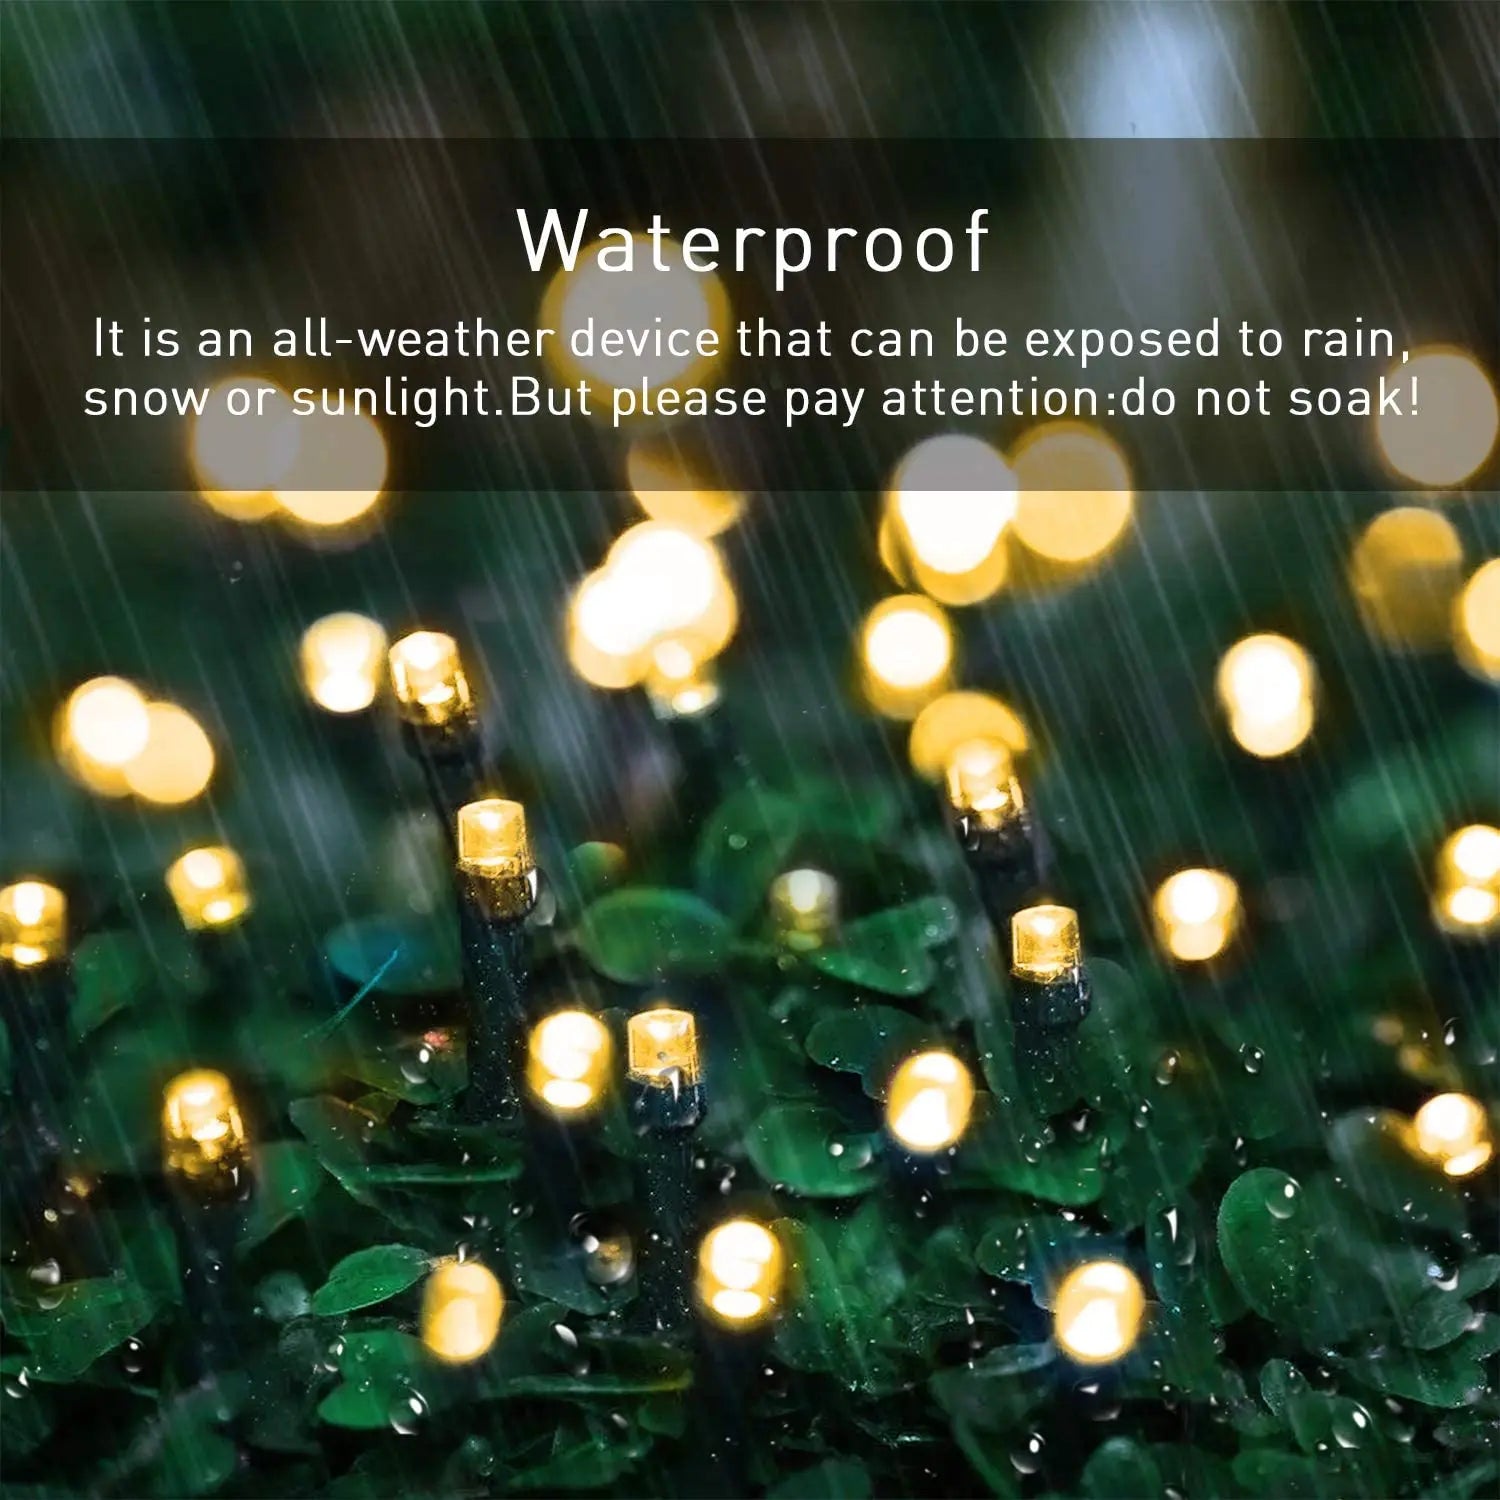 Outdoors Solar String Light, Waterproof design suitable for use in various weather conditions, except underwater.